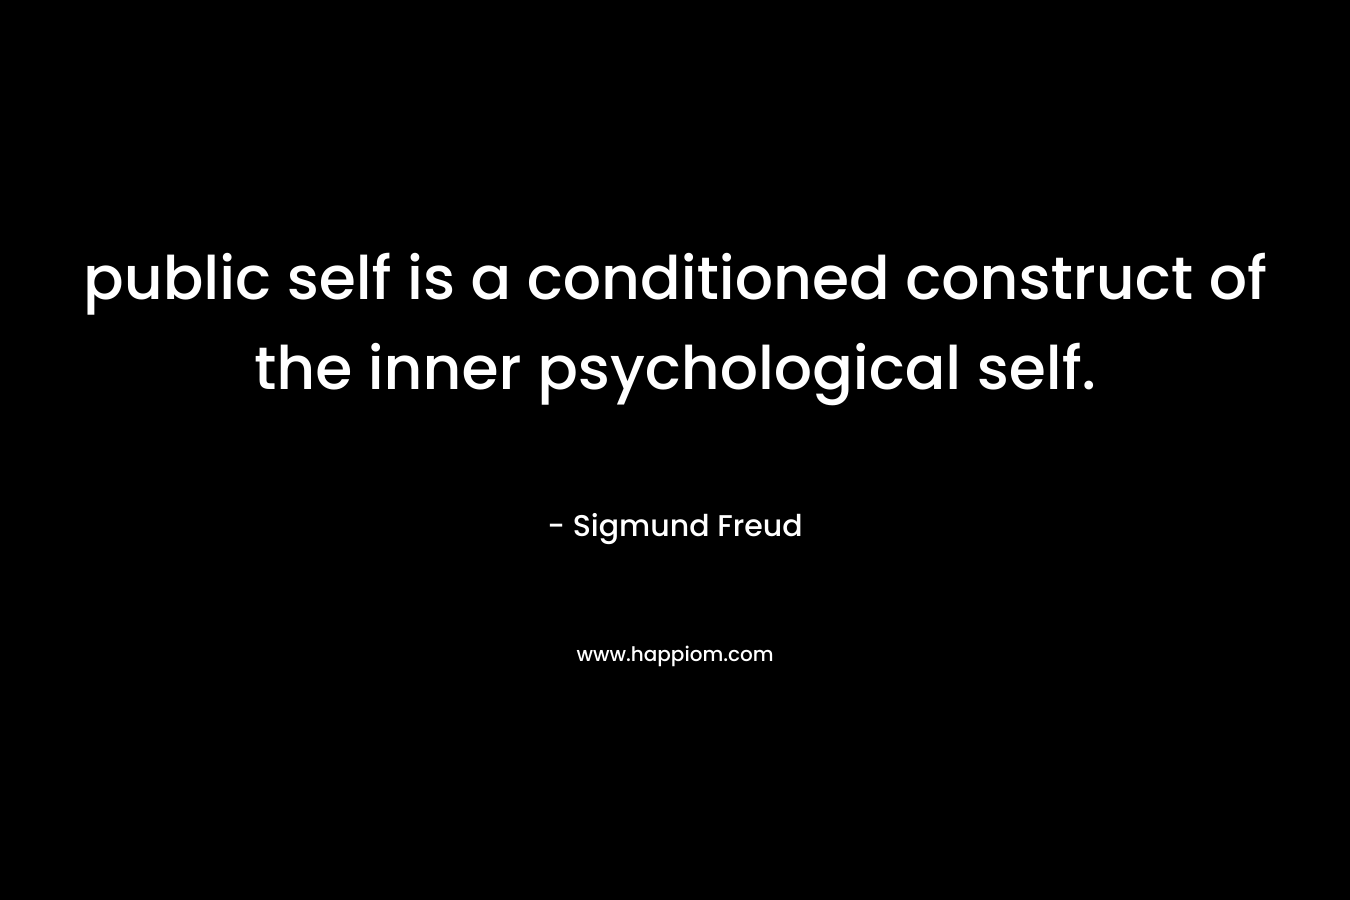 public self is a conditioned construct of the inner psychological self.